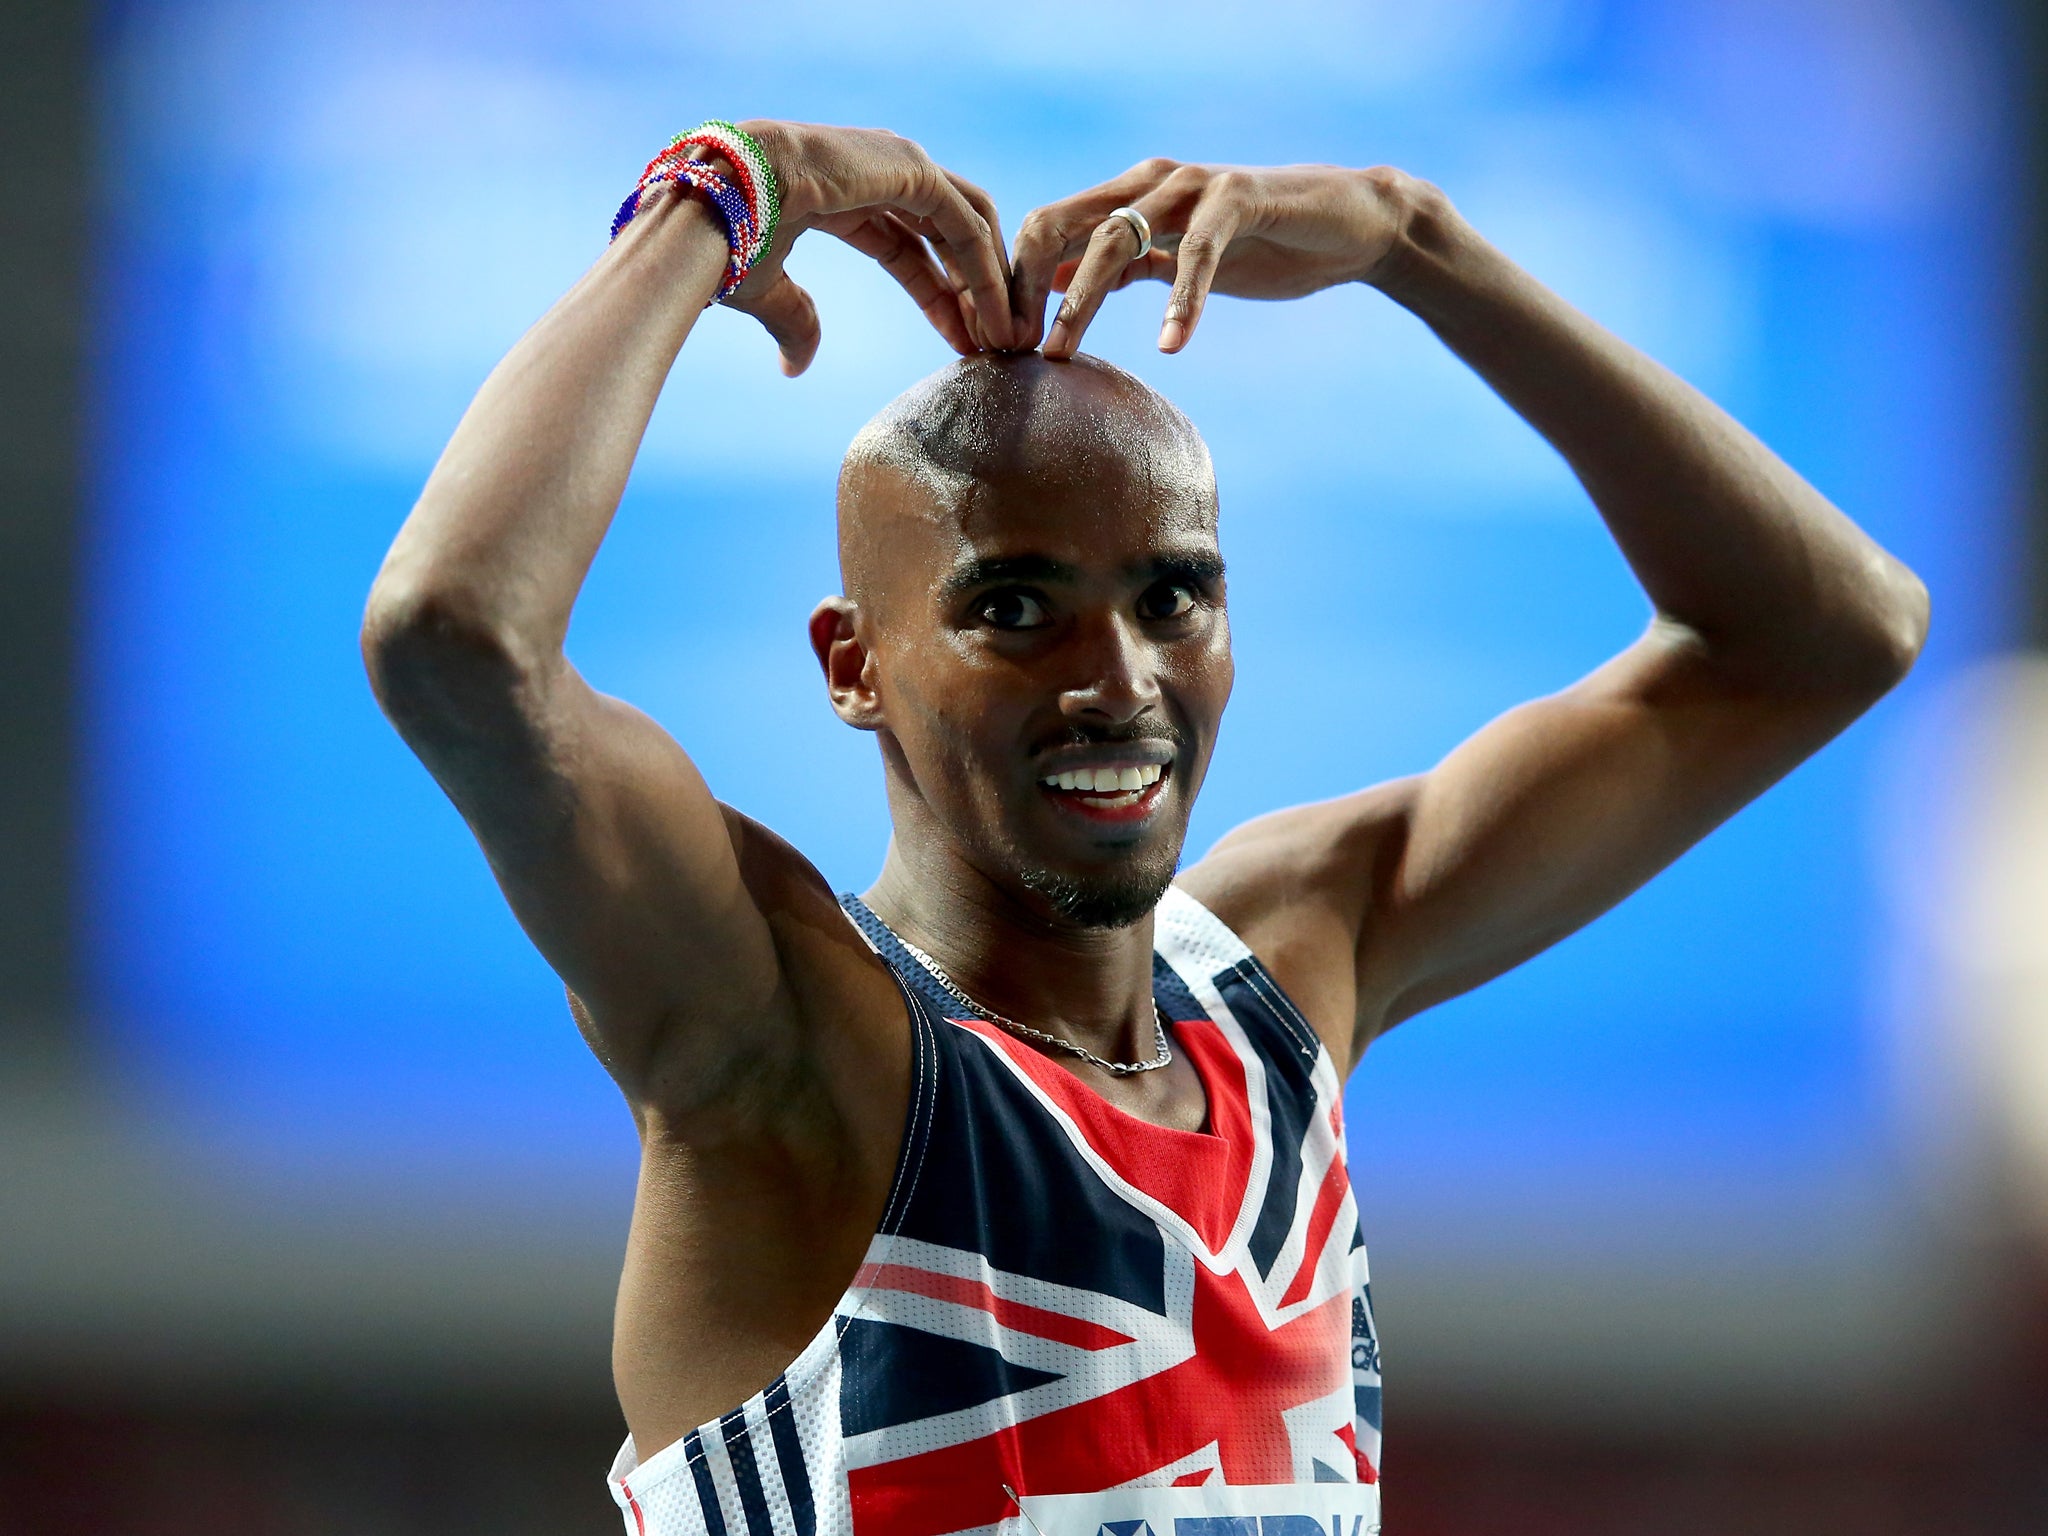 Mo Farah celebrates after winning Gold in the 5,000m